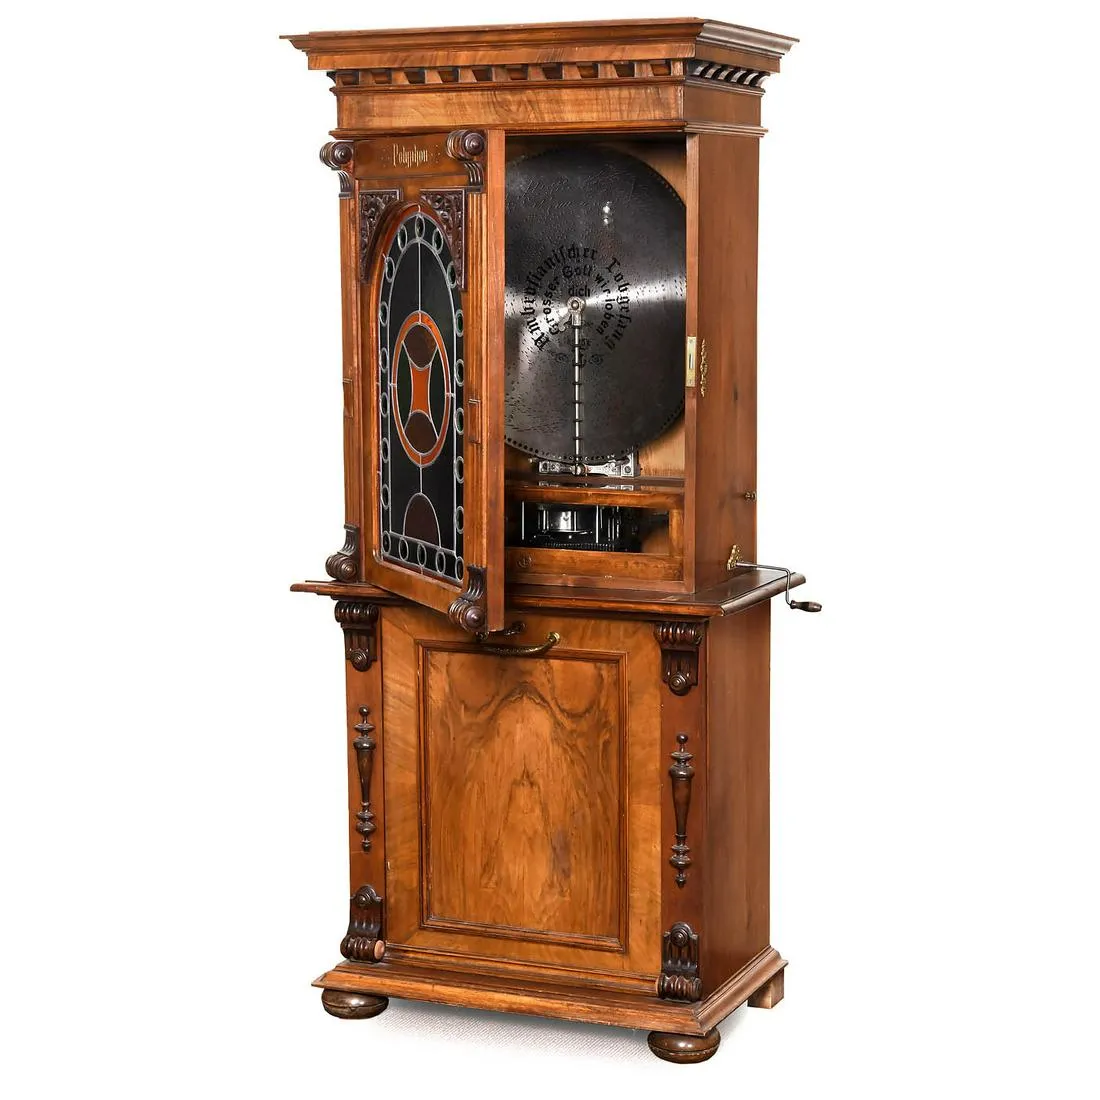 Circa-1899 Polyphon-style 105-disc musical box, Polyphon Musikwerke of Leipzig, $9,823. Image courtesy of Auction Team Breker and LiveAuctioneers